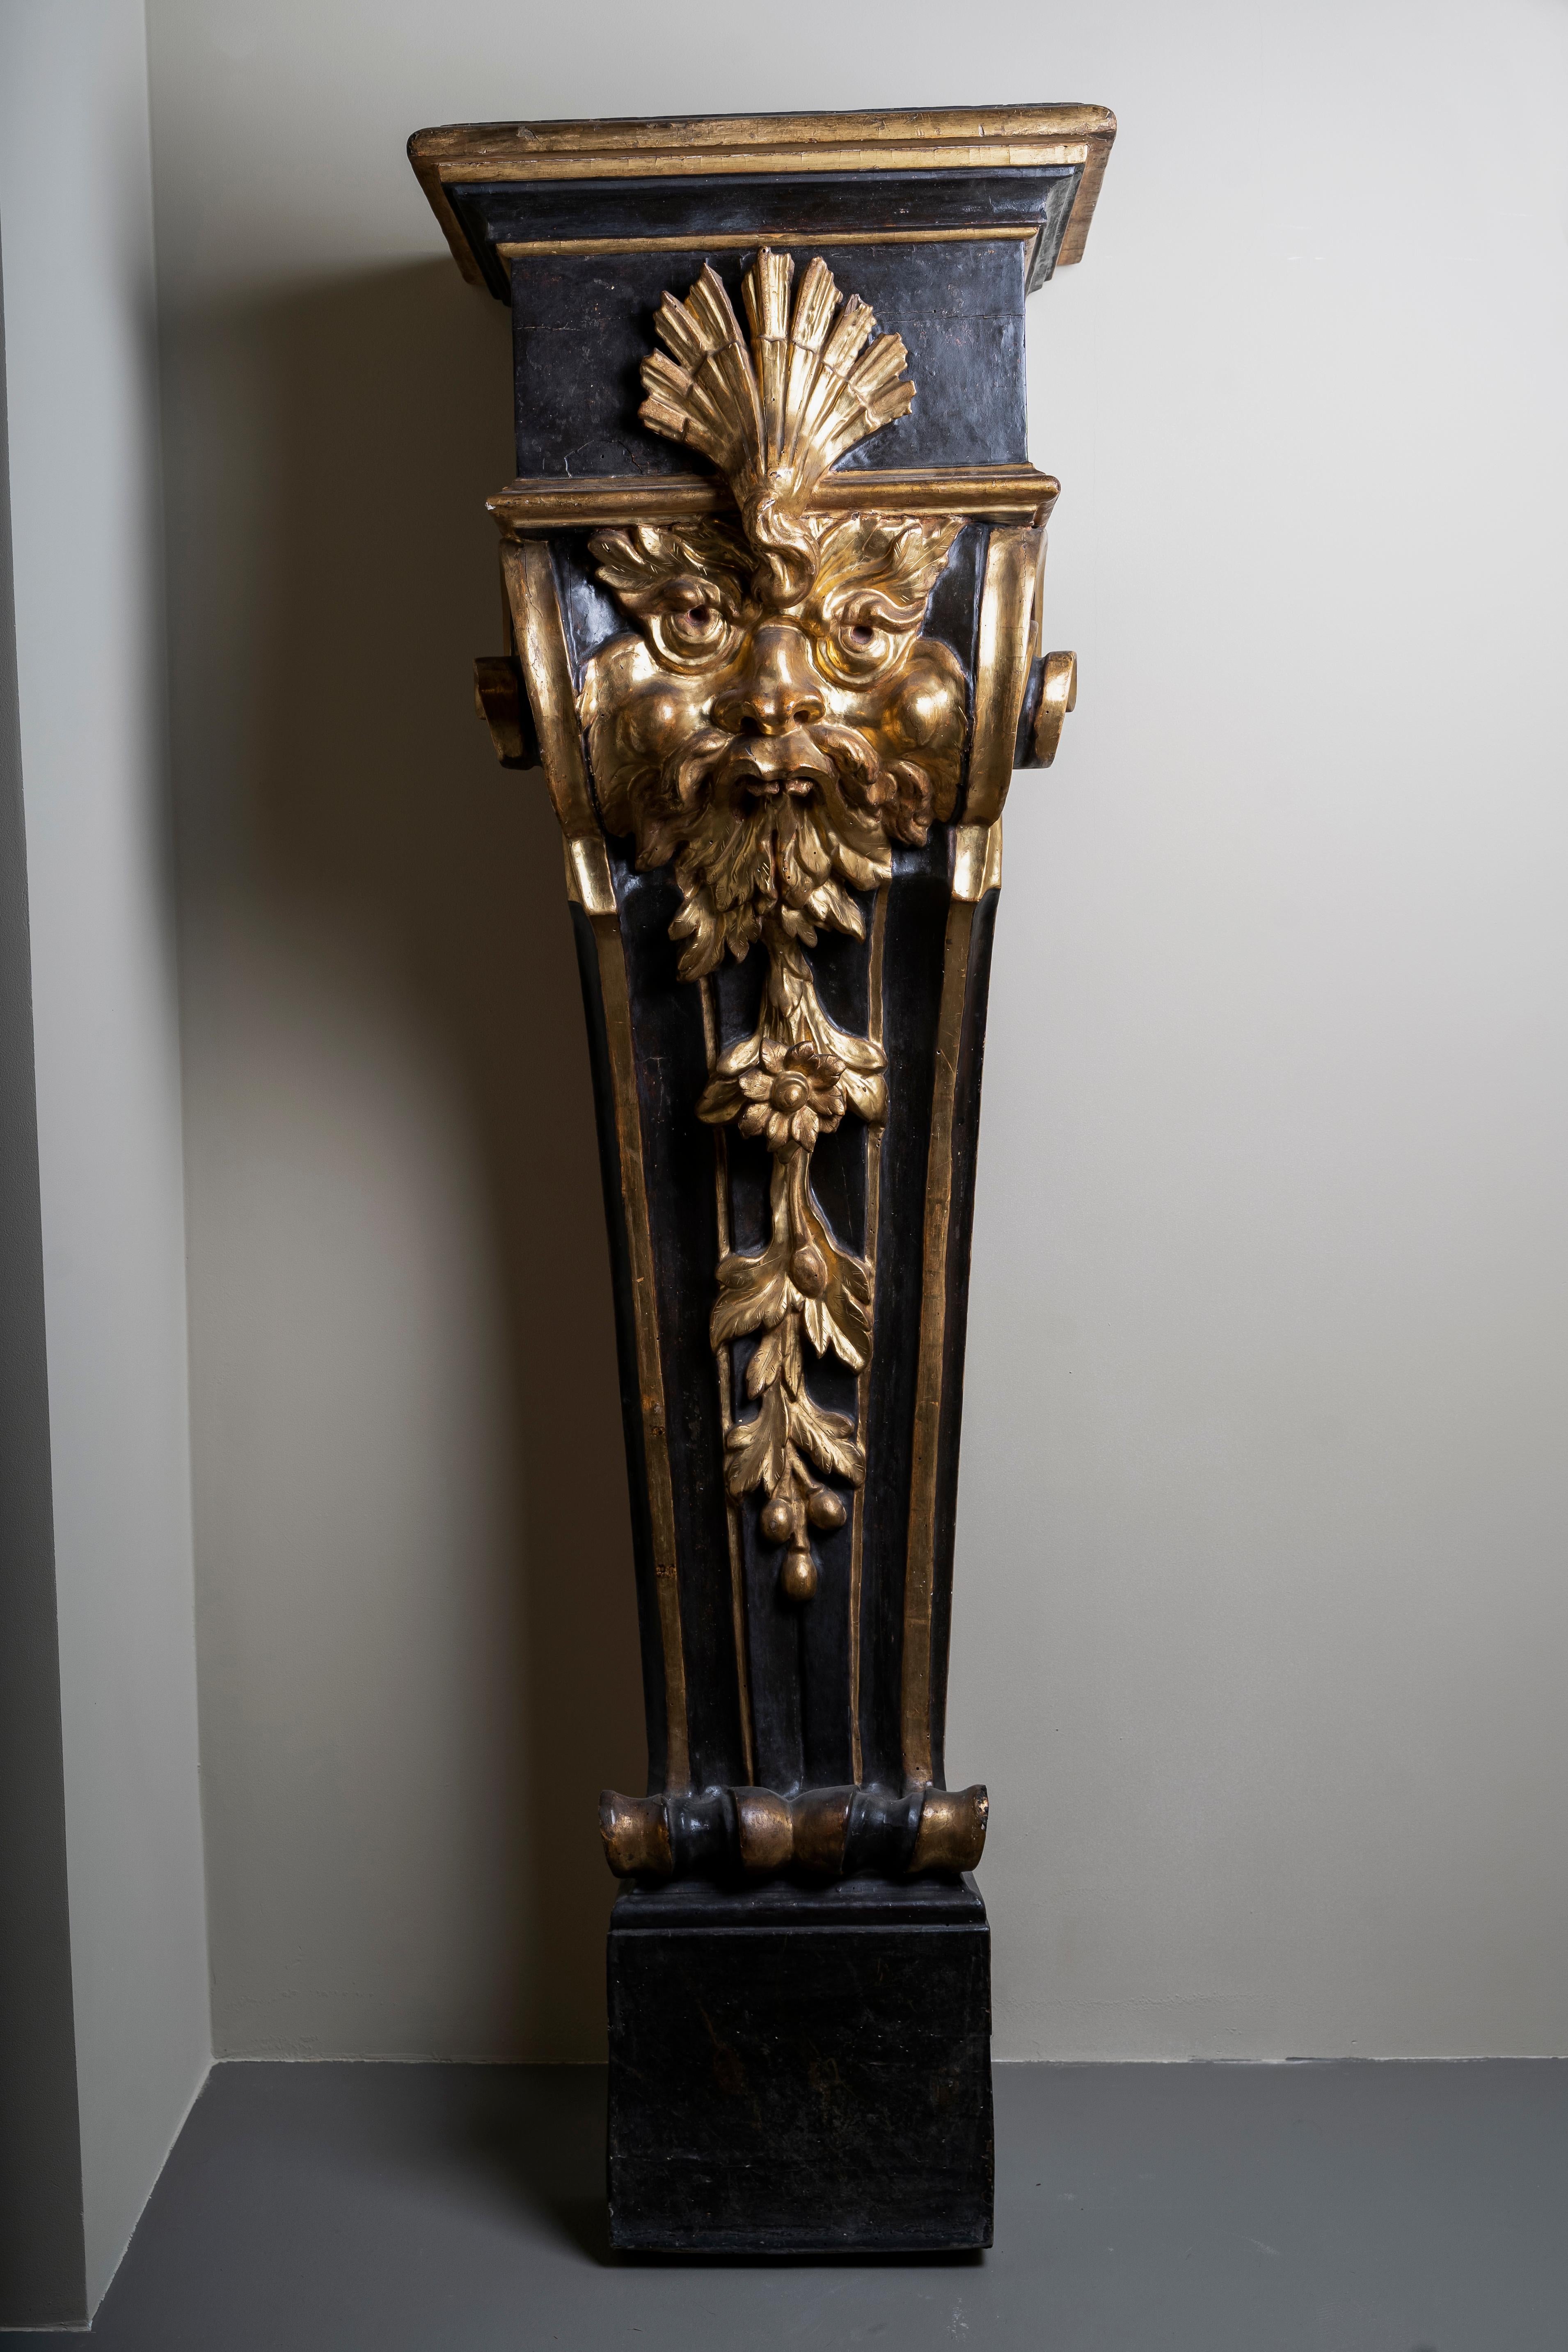 Renaissance Rare Pair of Pedestals Decorated with Grotesques, Florence, Early 17th Century